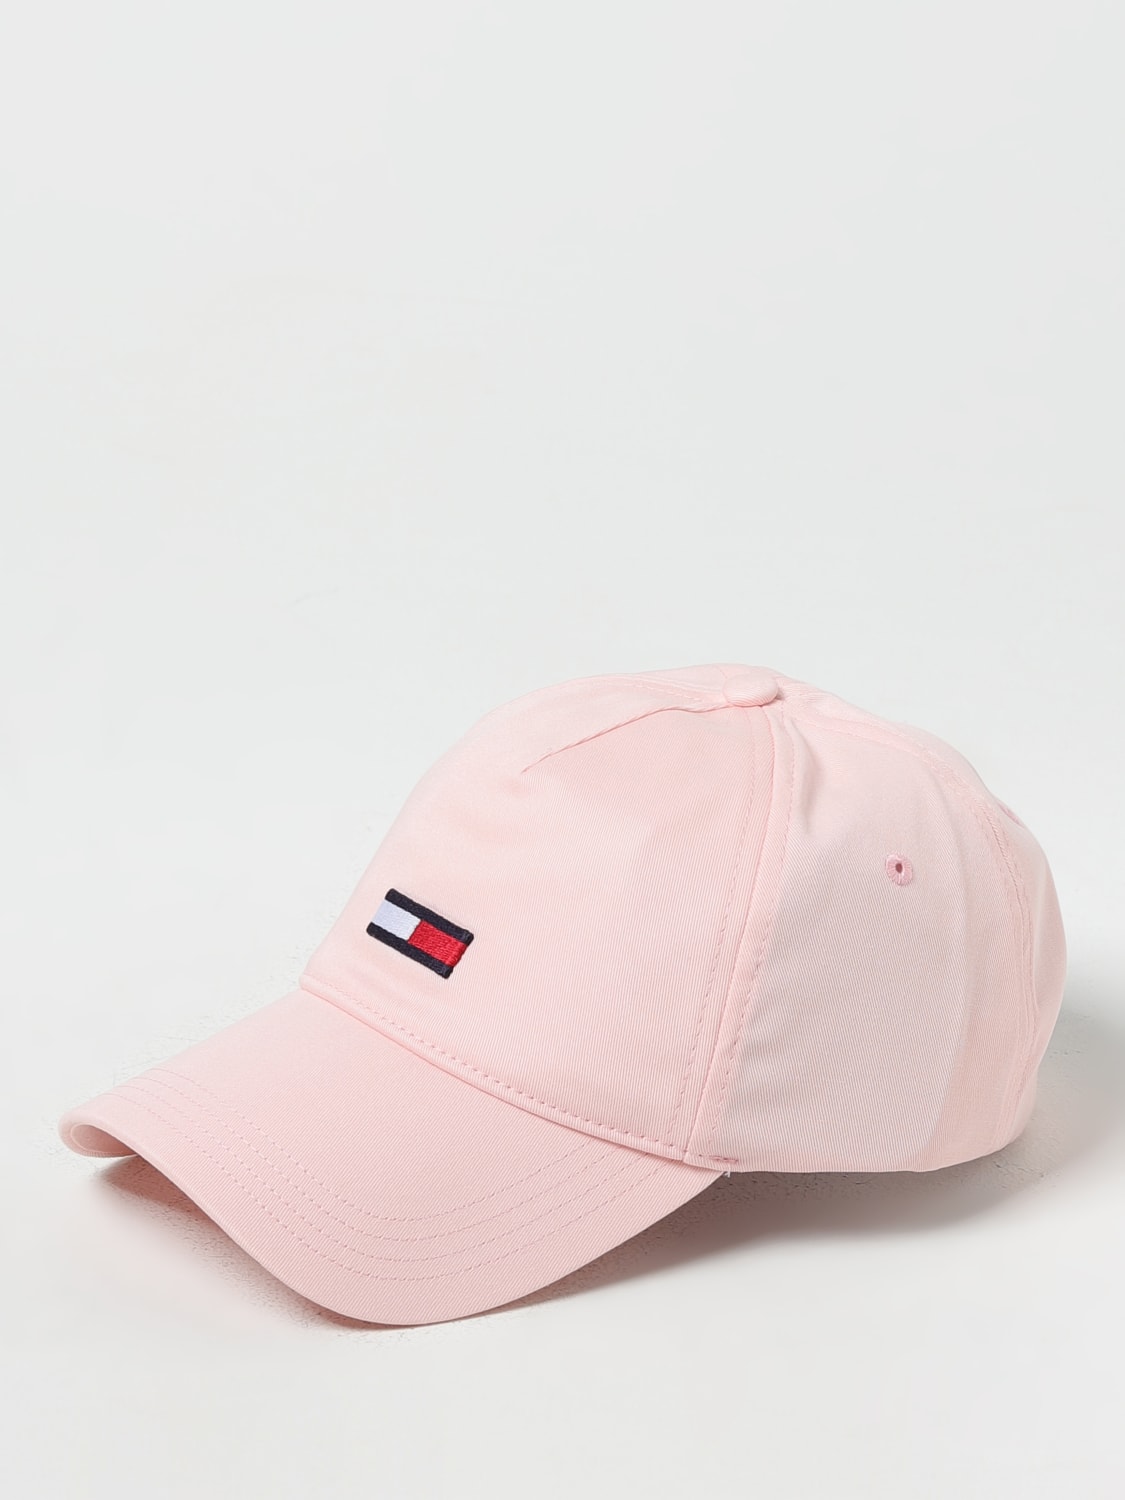 TOMMY HILFIGER: AW0AW14986 | women hat online hat Hilfiger for Tommy at - Pink